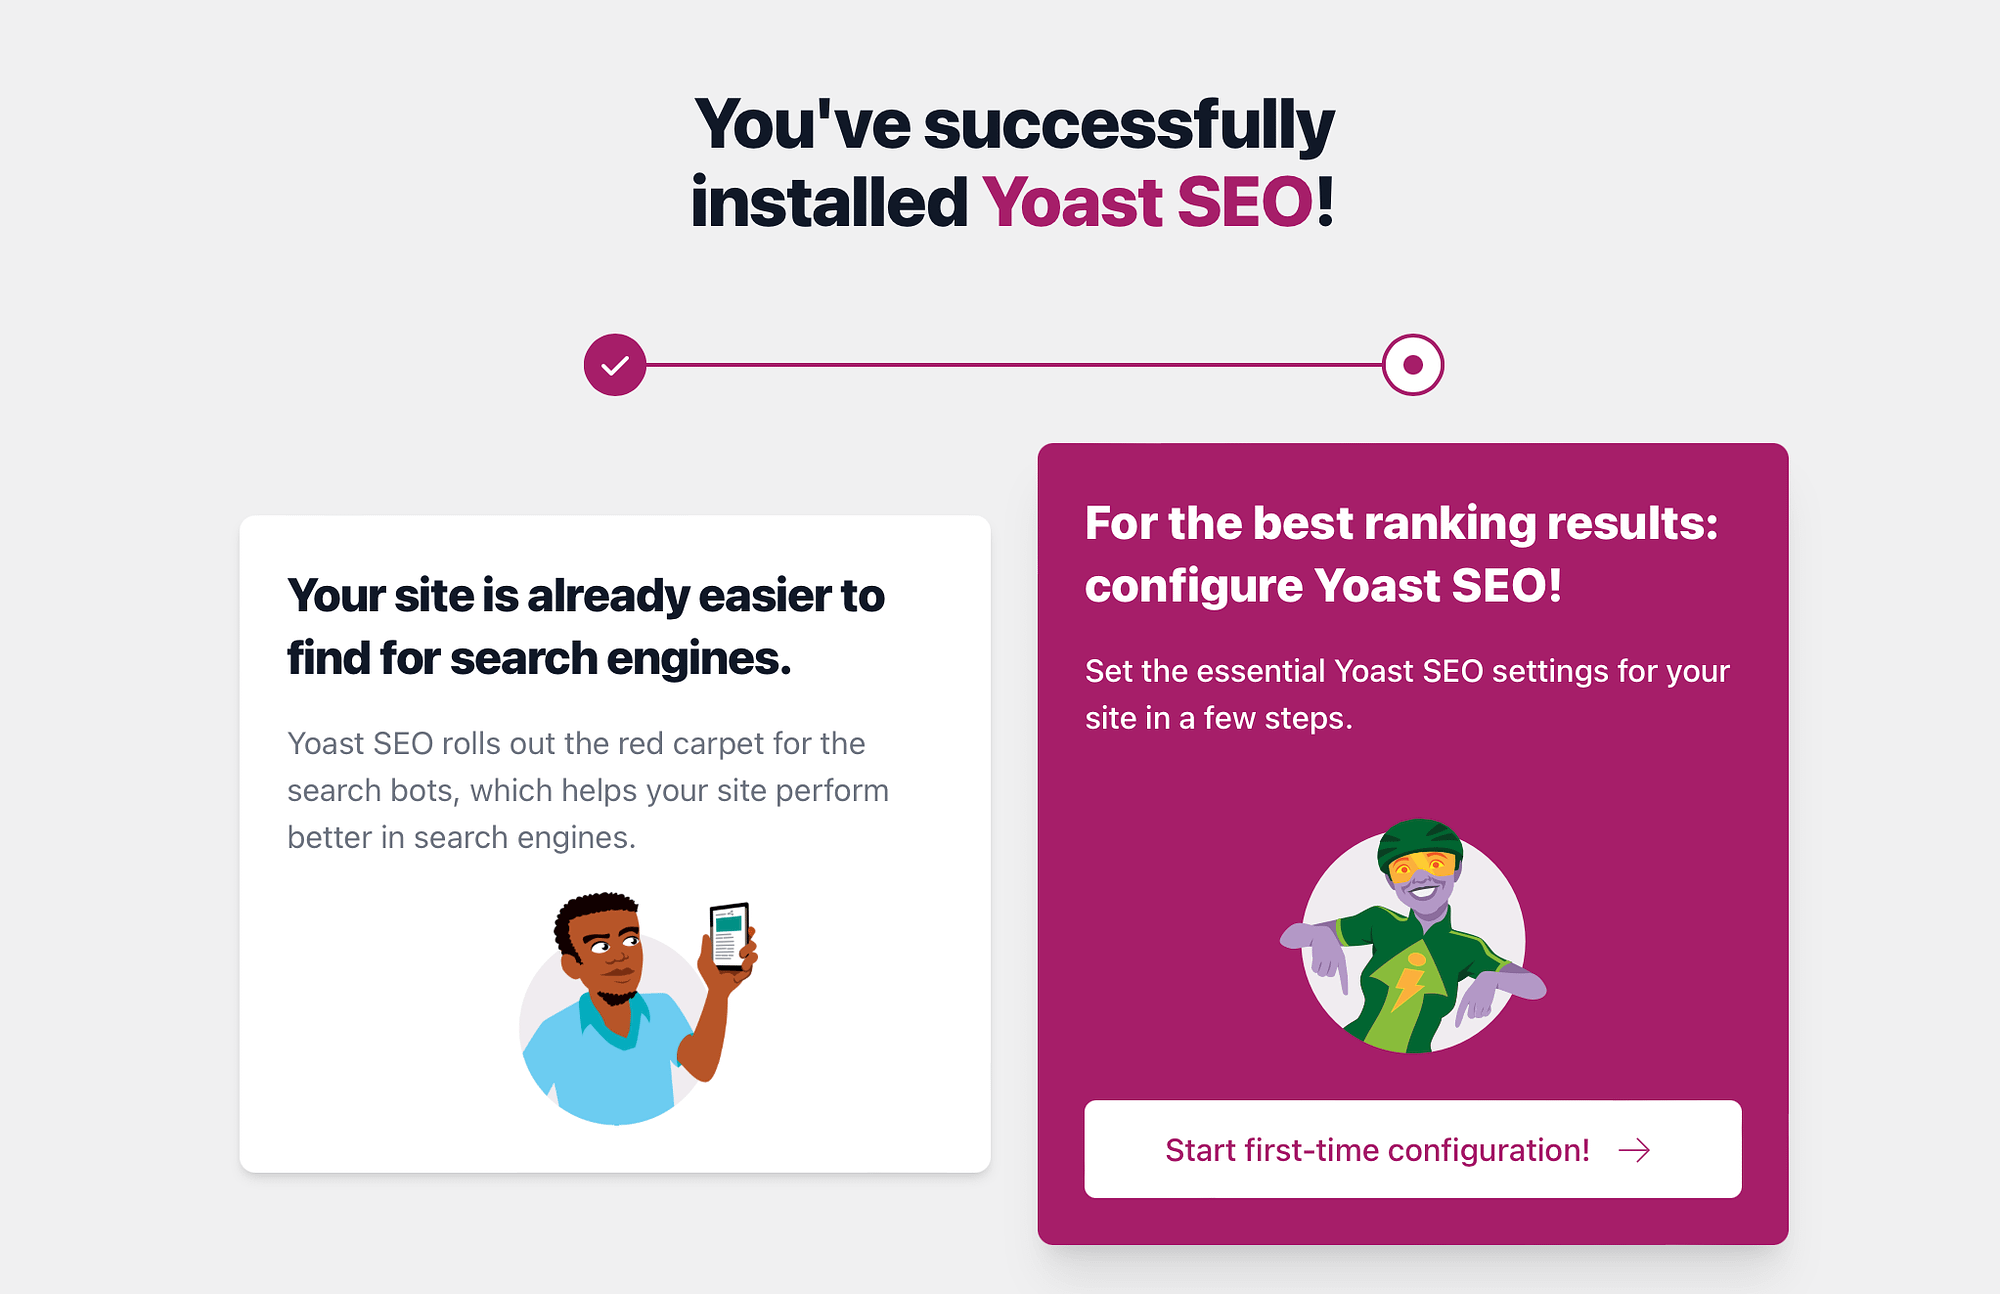 How to use Yoast SEO by starting with the configuration wizard.